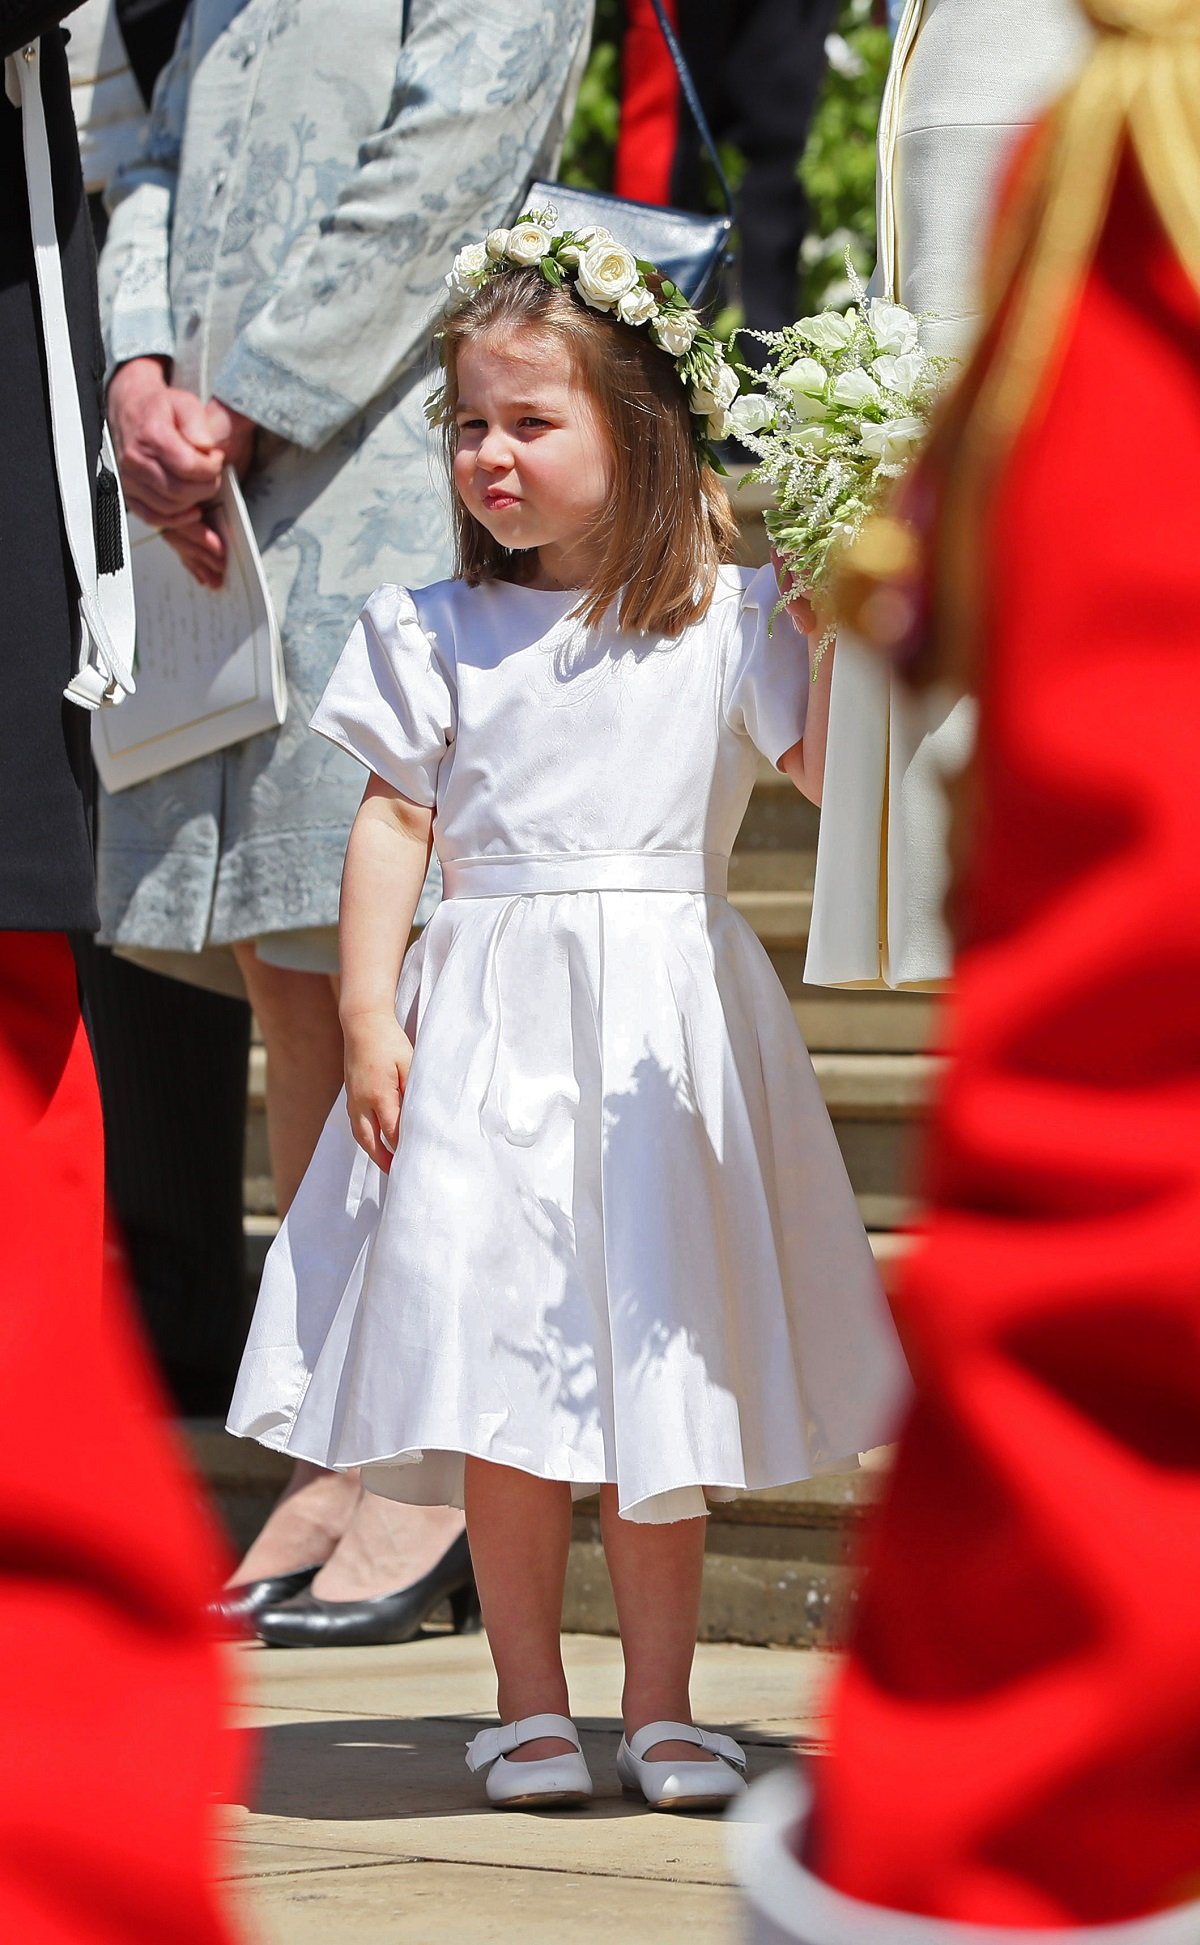 Bridesmaid Princess Charlotte looks on after attending the wedding ceremony of Prince Harry and Meghan Markle